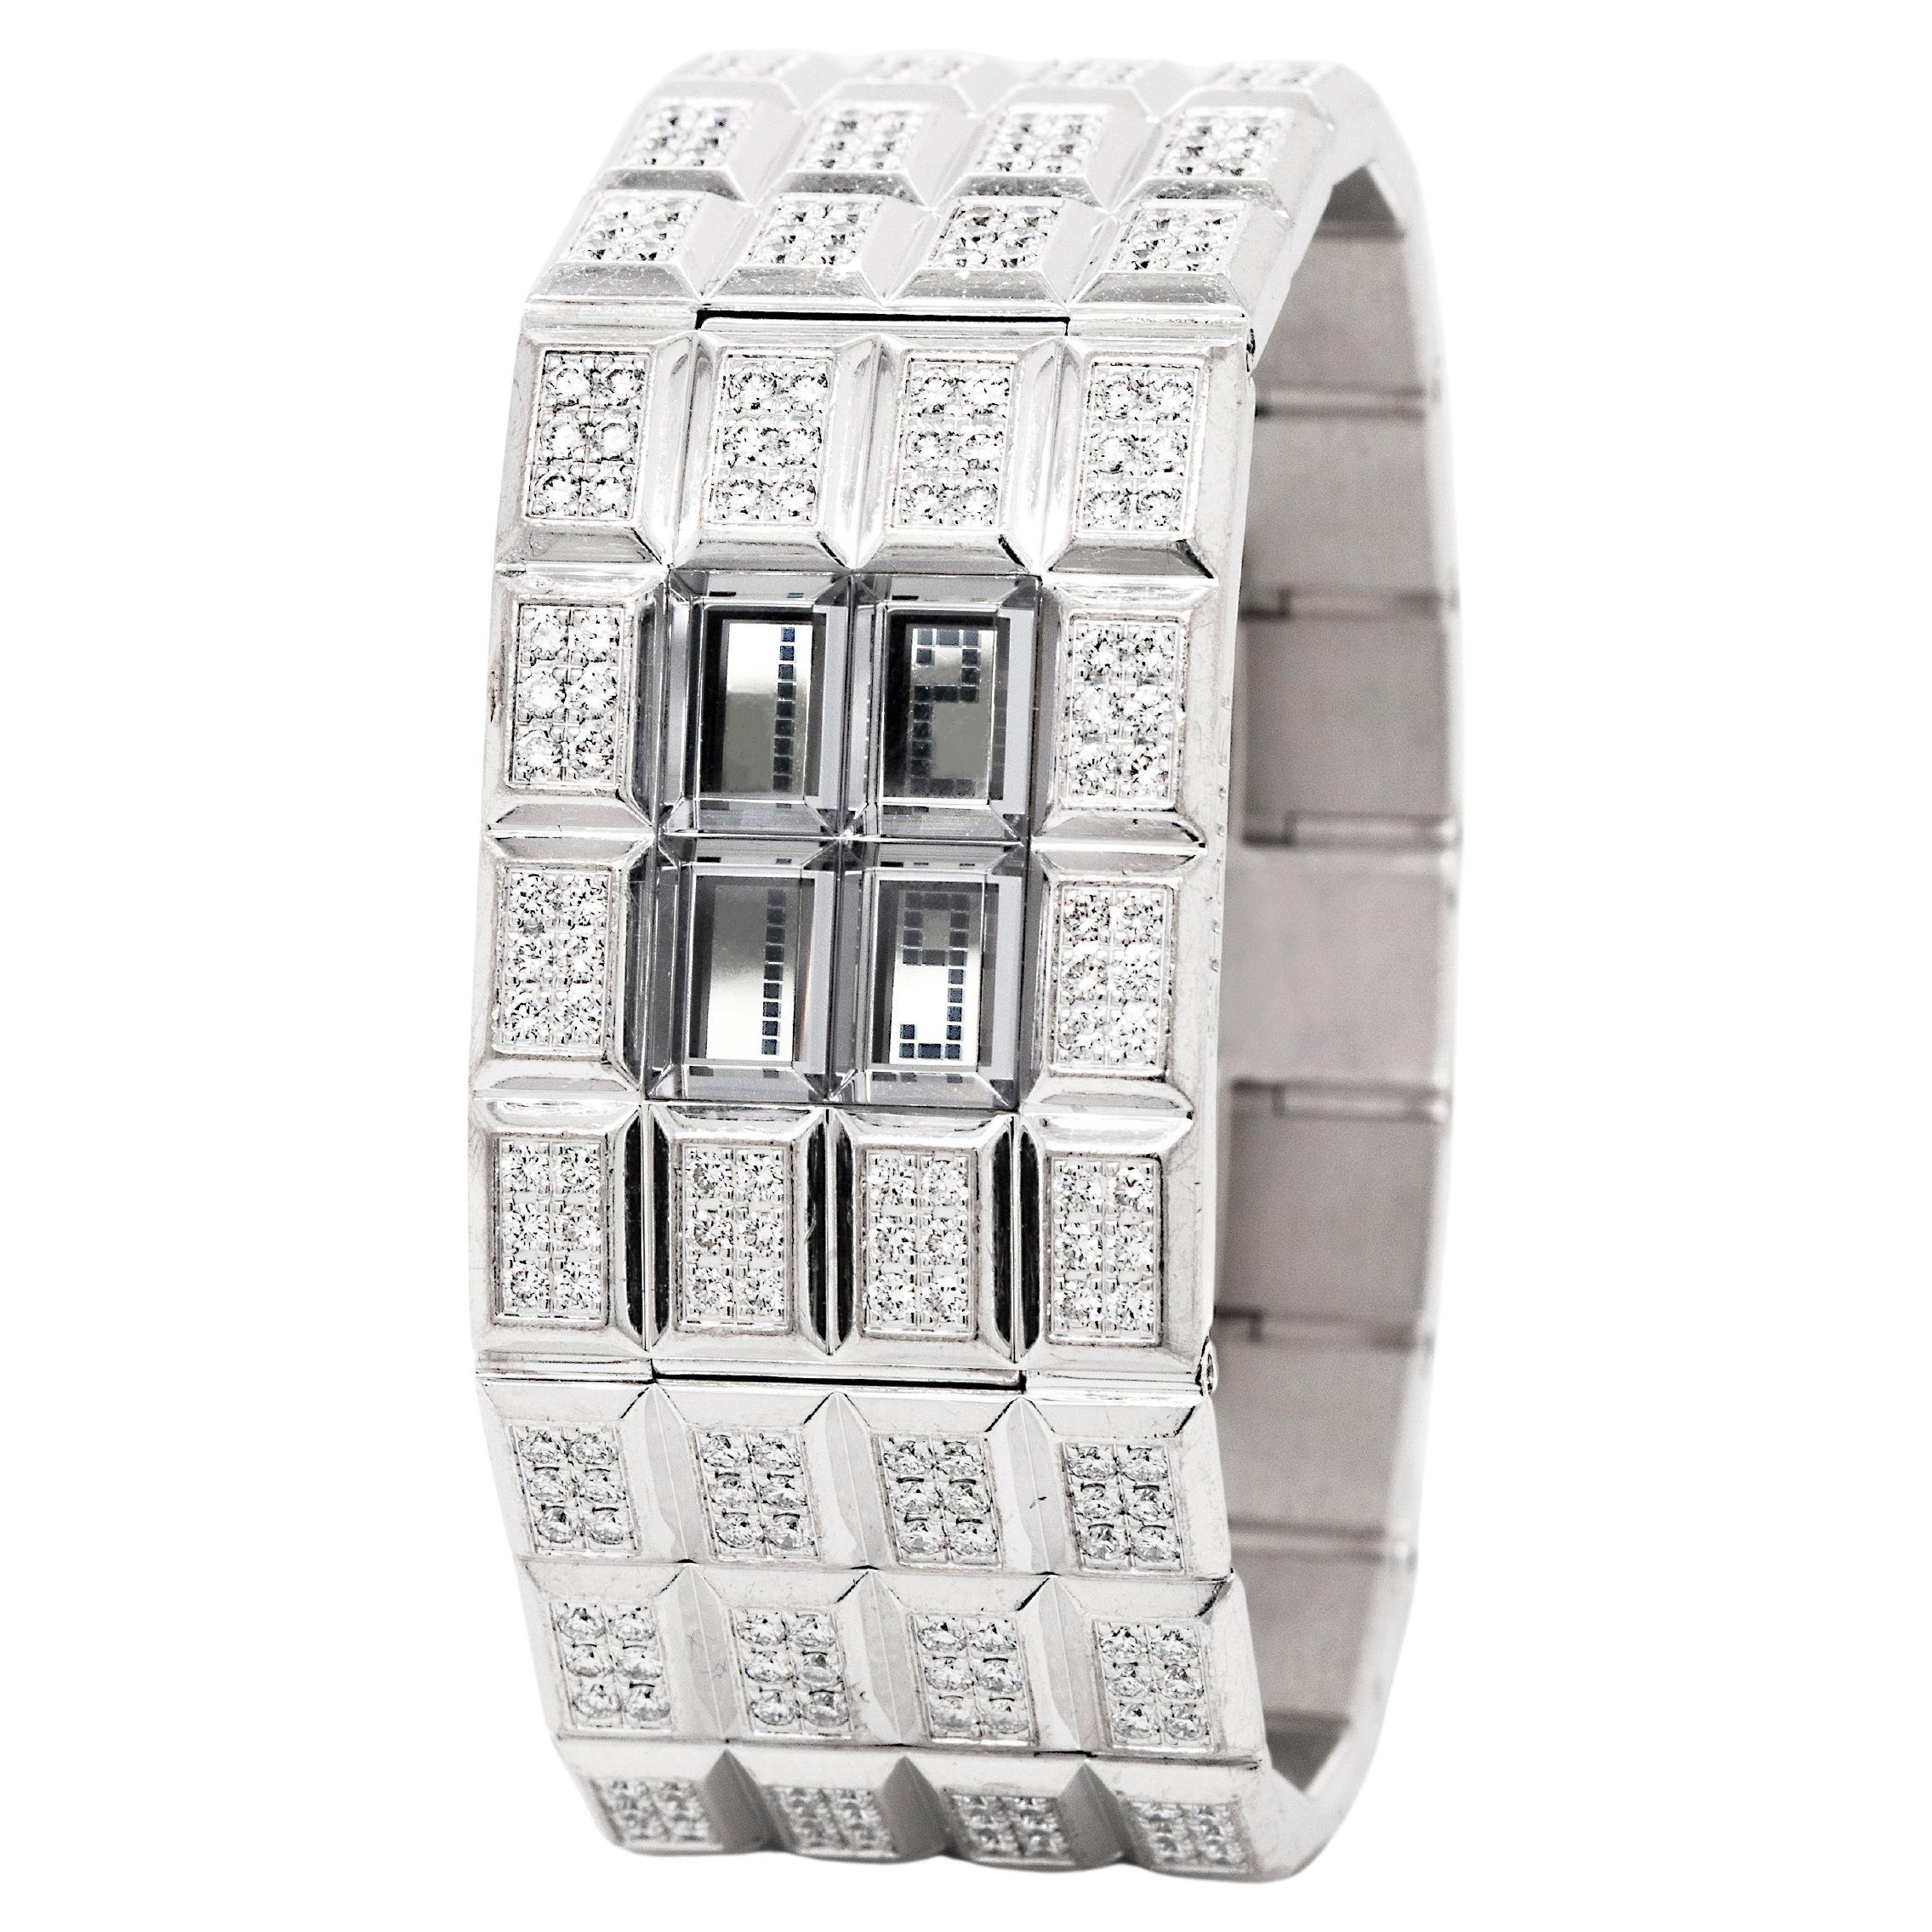 CHANEL Chocolat Diamond and 18 Carat White Gold Digital Watch Nº 14/19 For Sale